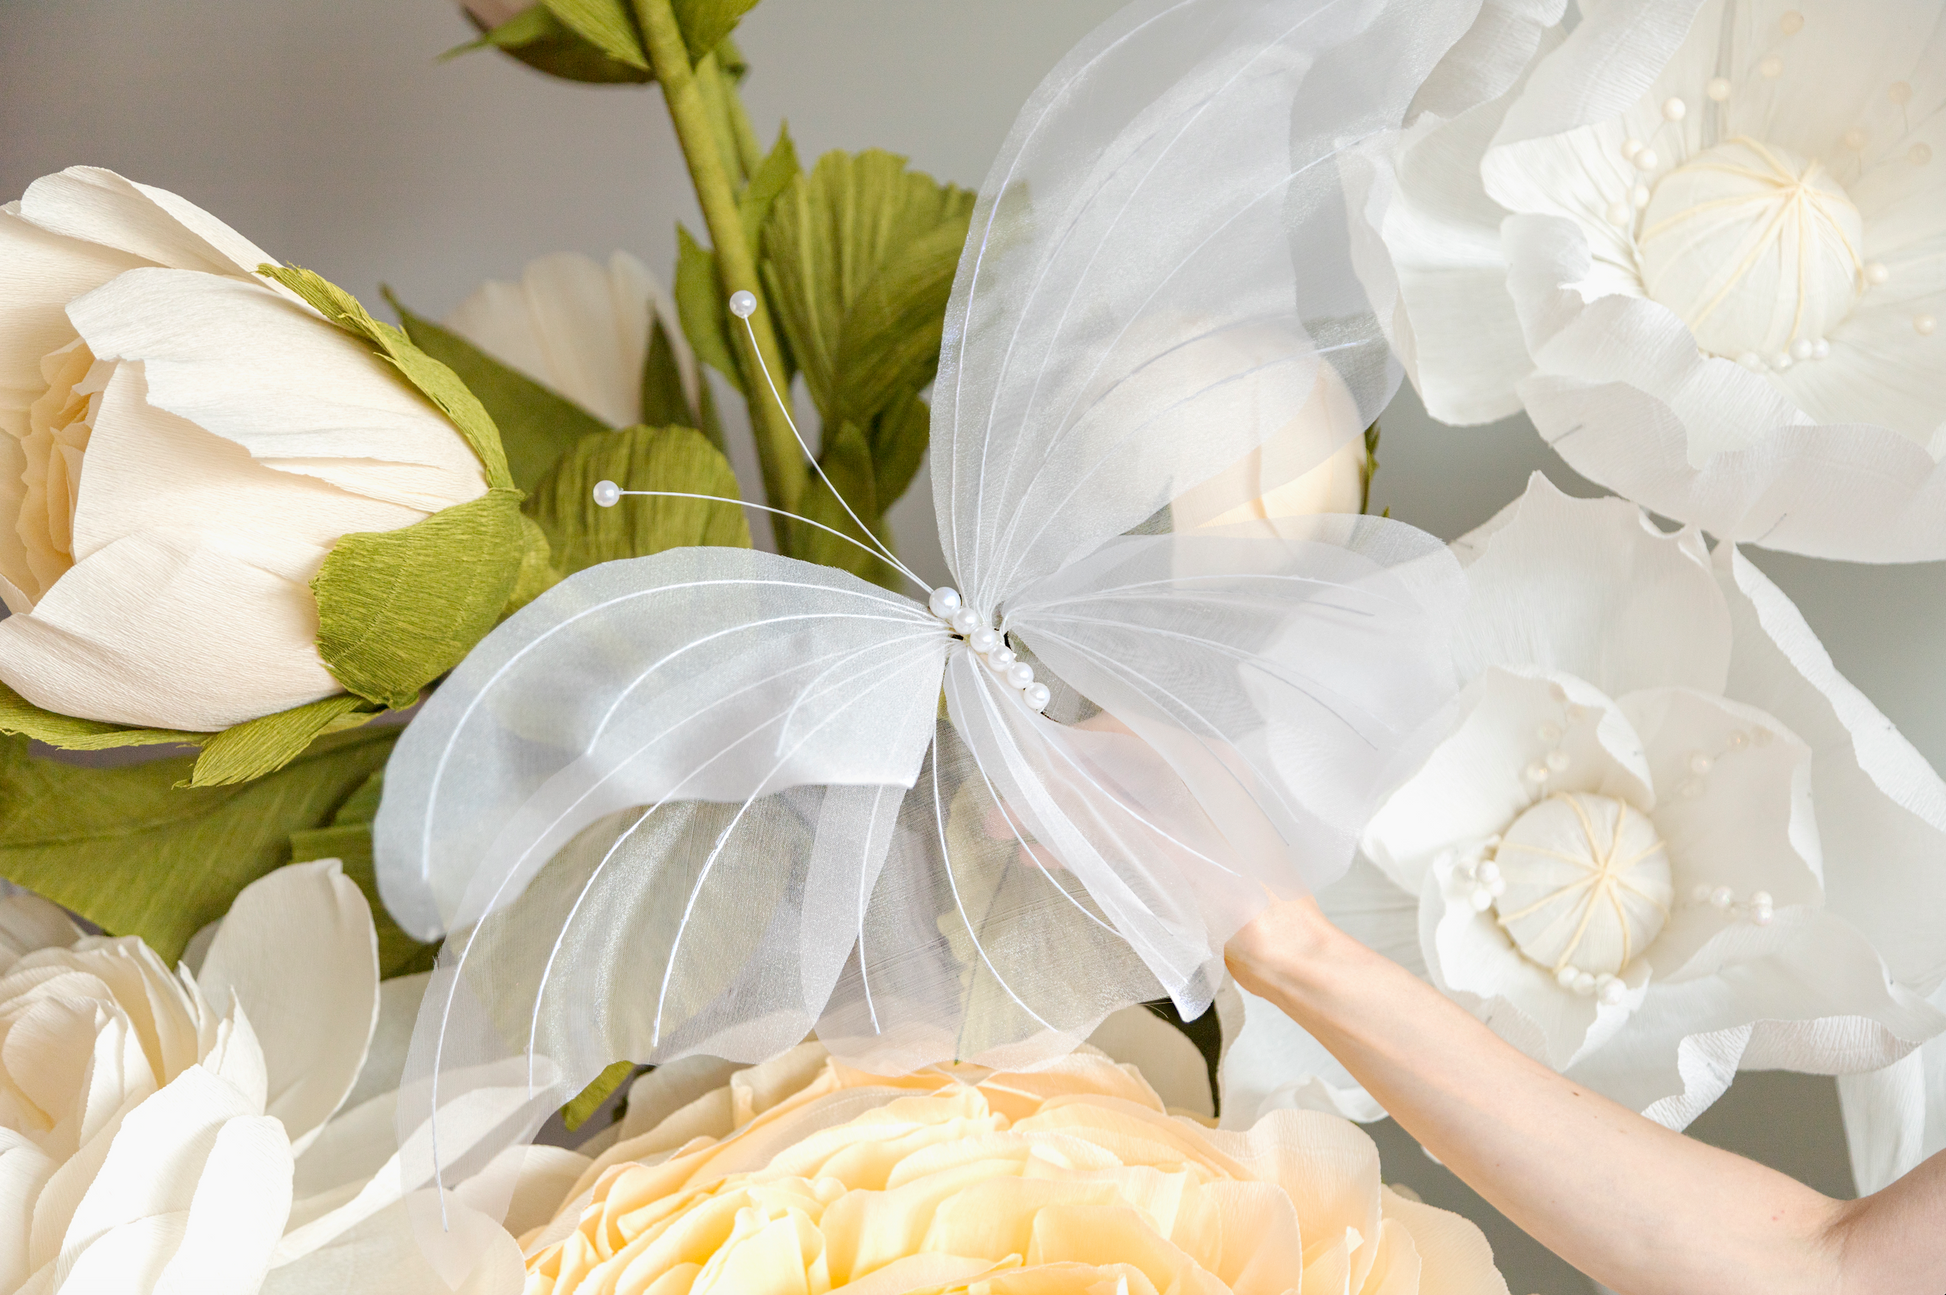 Giant white butterfly for event decor shipping from the USA